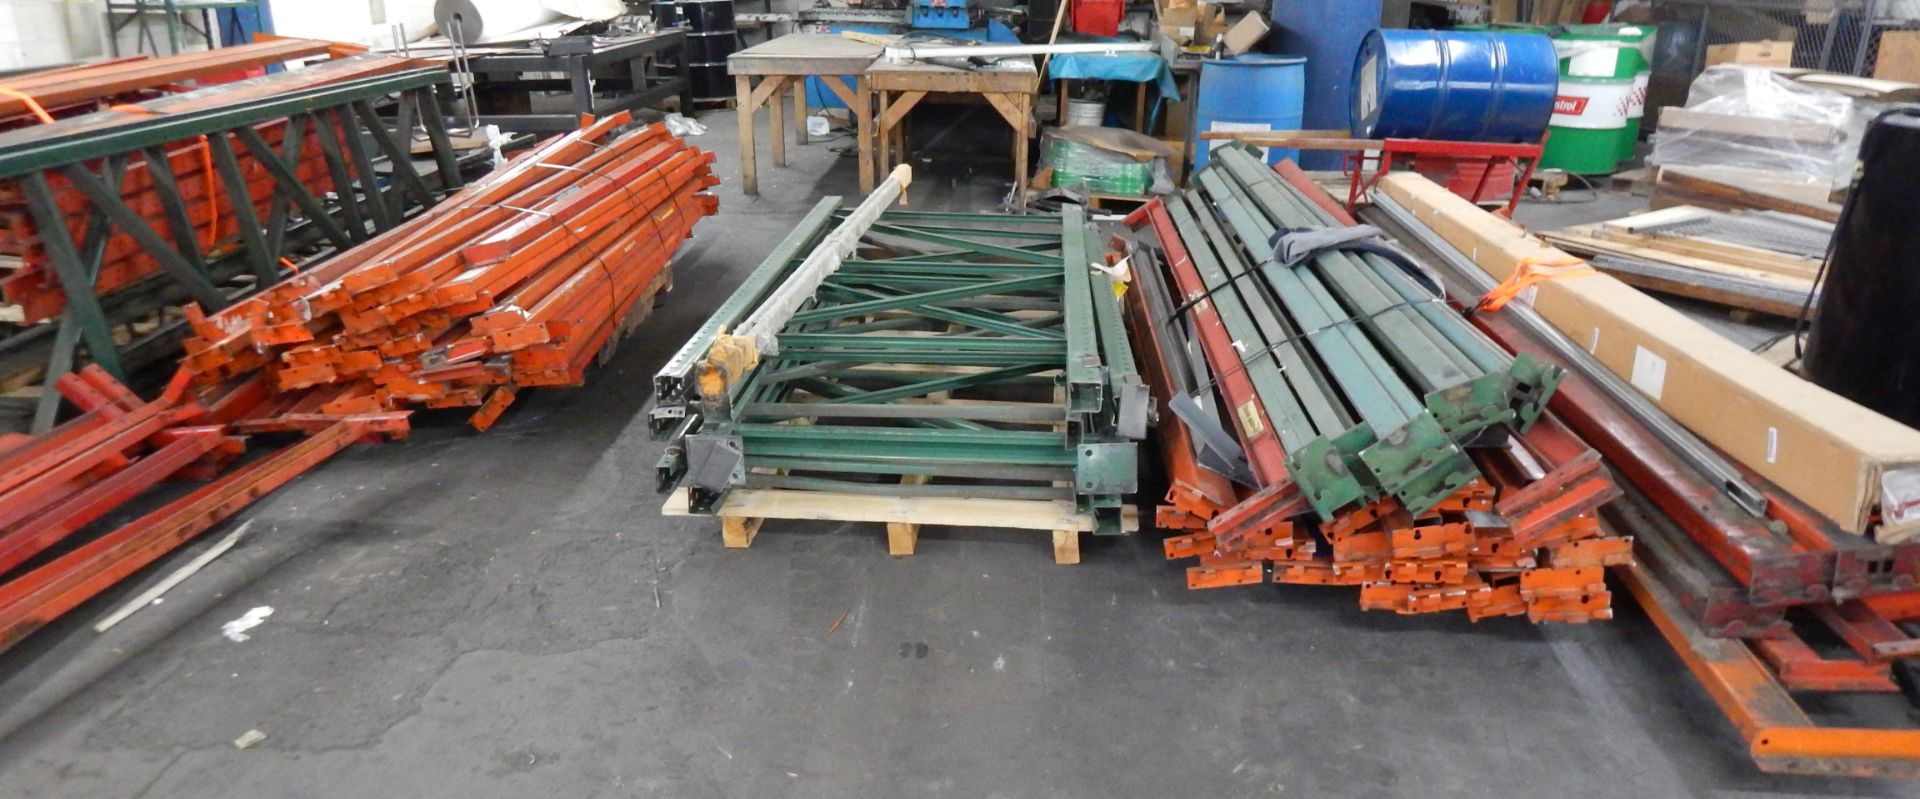 LARGE QUANTITY OF PALLET RACKING, APPROXIMATELY [50] UPRIGHTS & [100] CROSS NUMBERS - Image 2 of 3